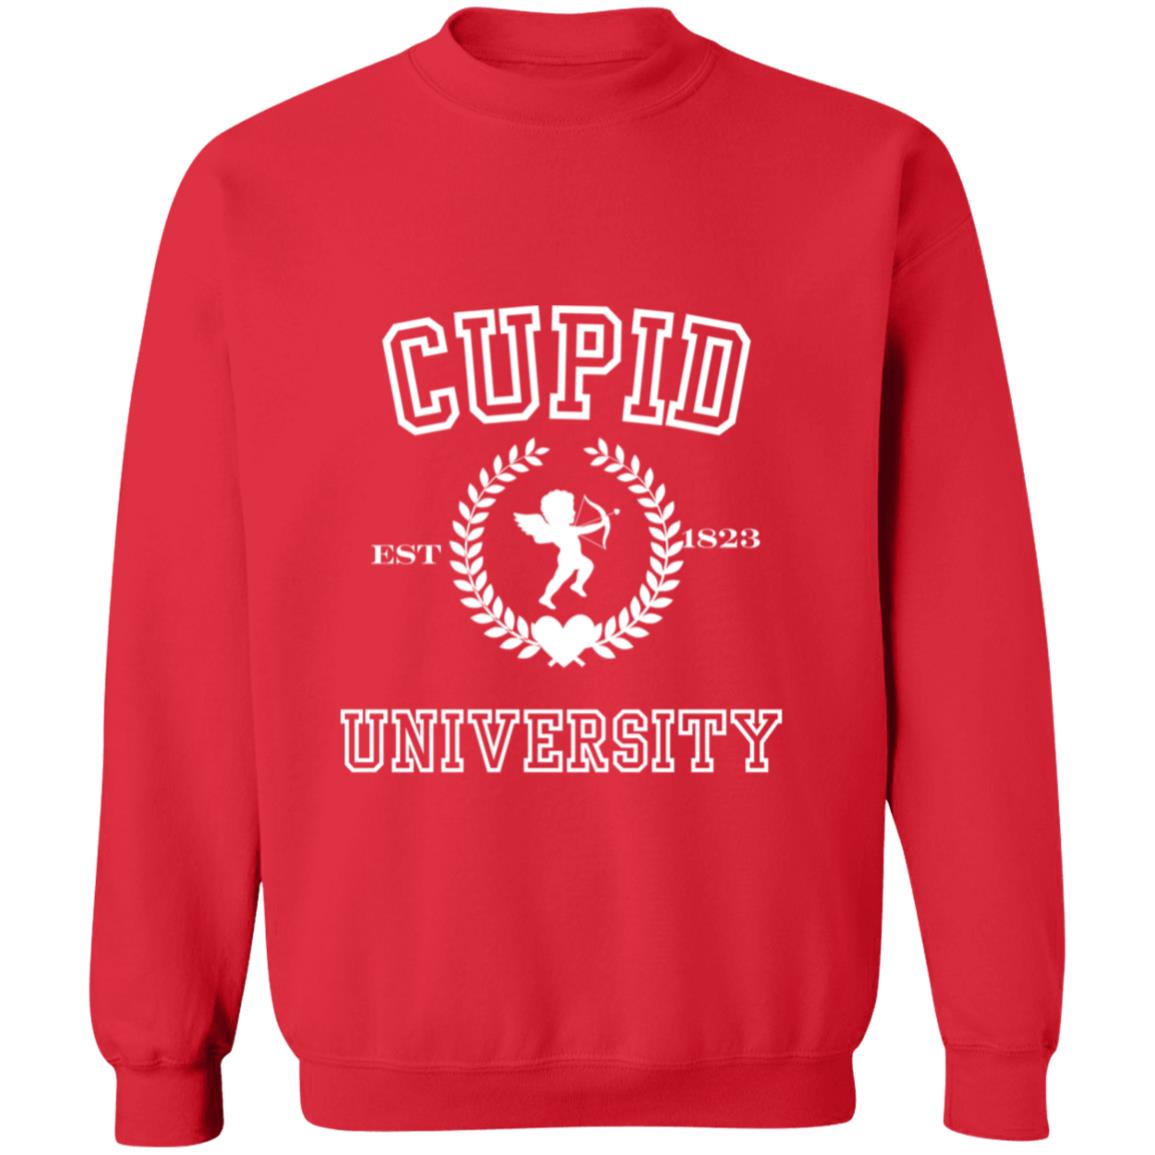 Get trendy with Cupid University (2) Cupid University Crewneck Pullover Sweatshirt - Sweatshirts available at Good Gift Company. Grab yours for $27 today!